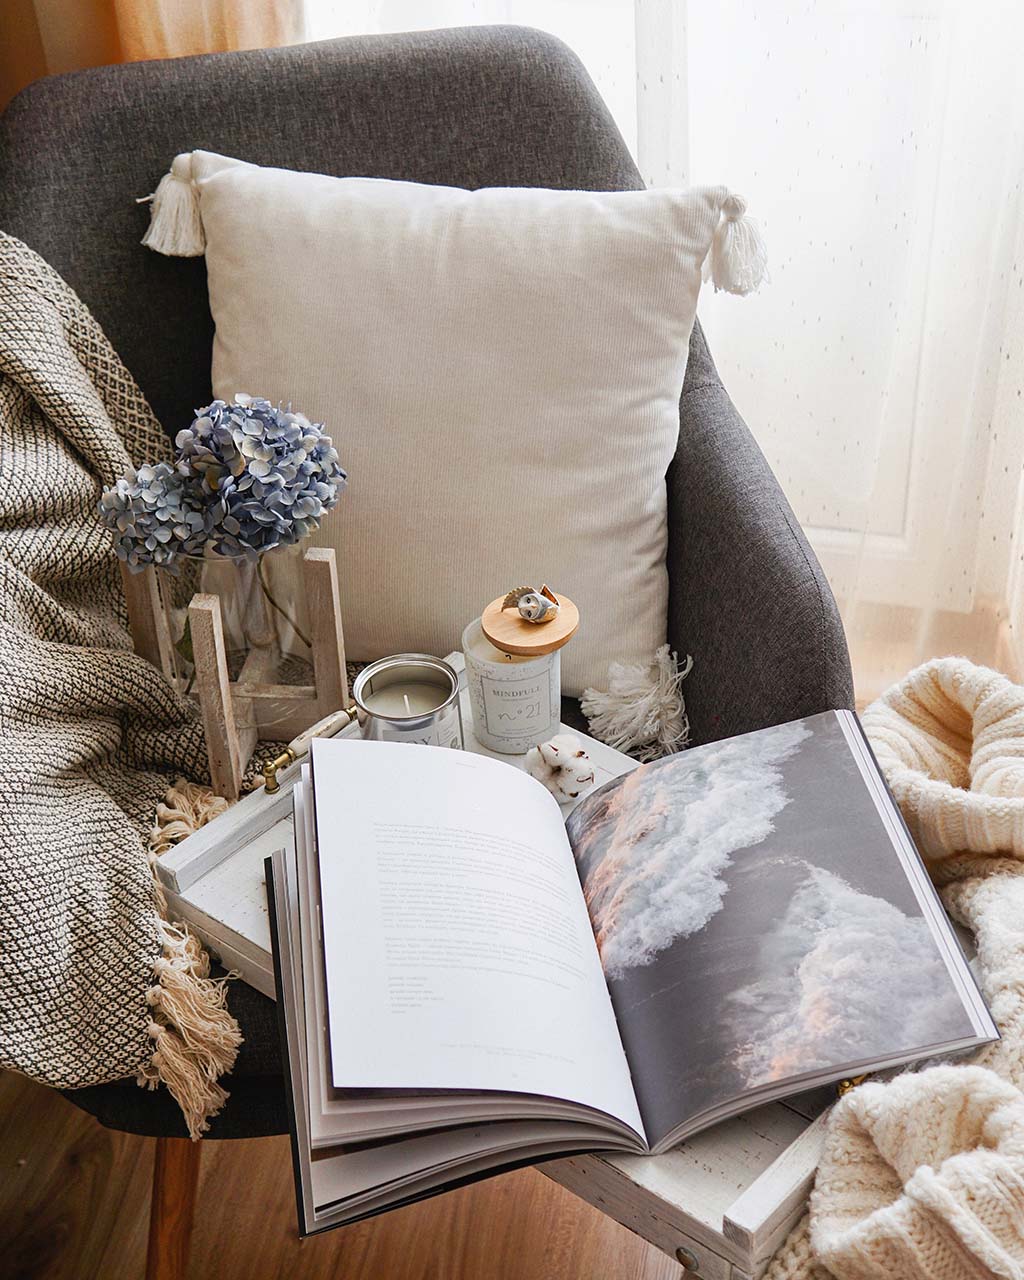 cosy reading nook with comfy blankets, cushions, a book, a candle